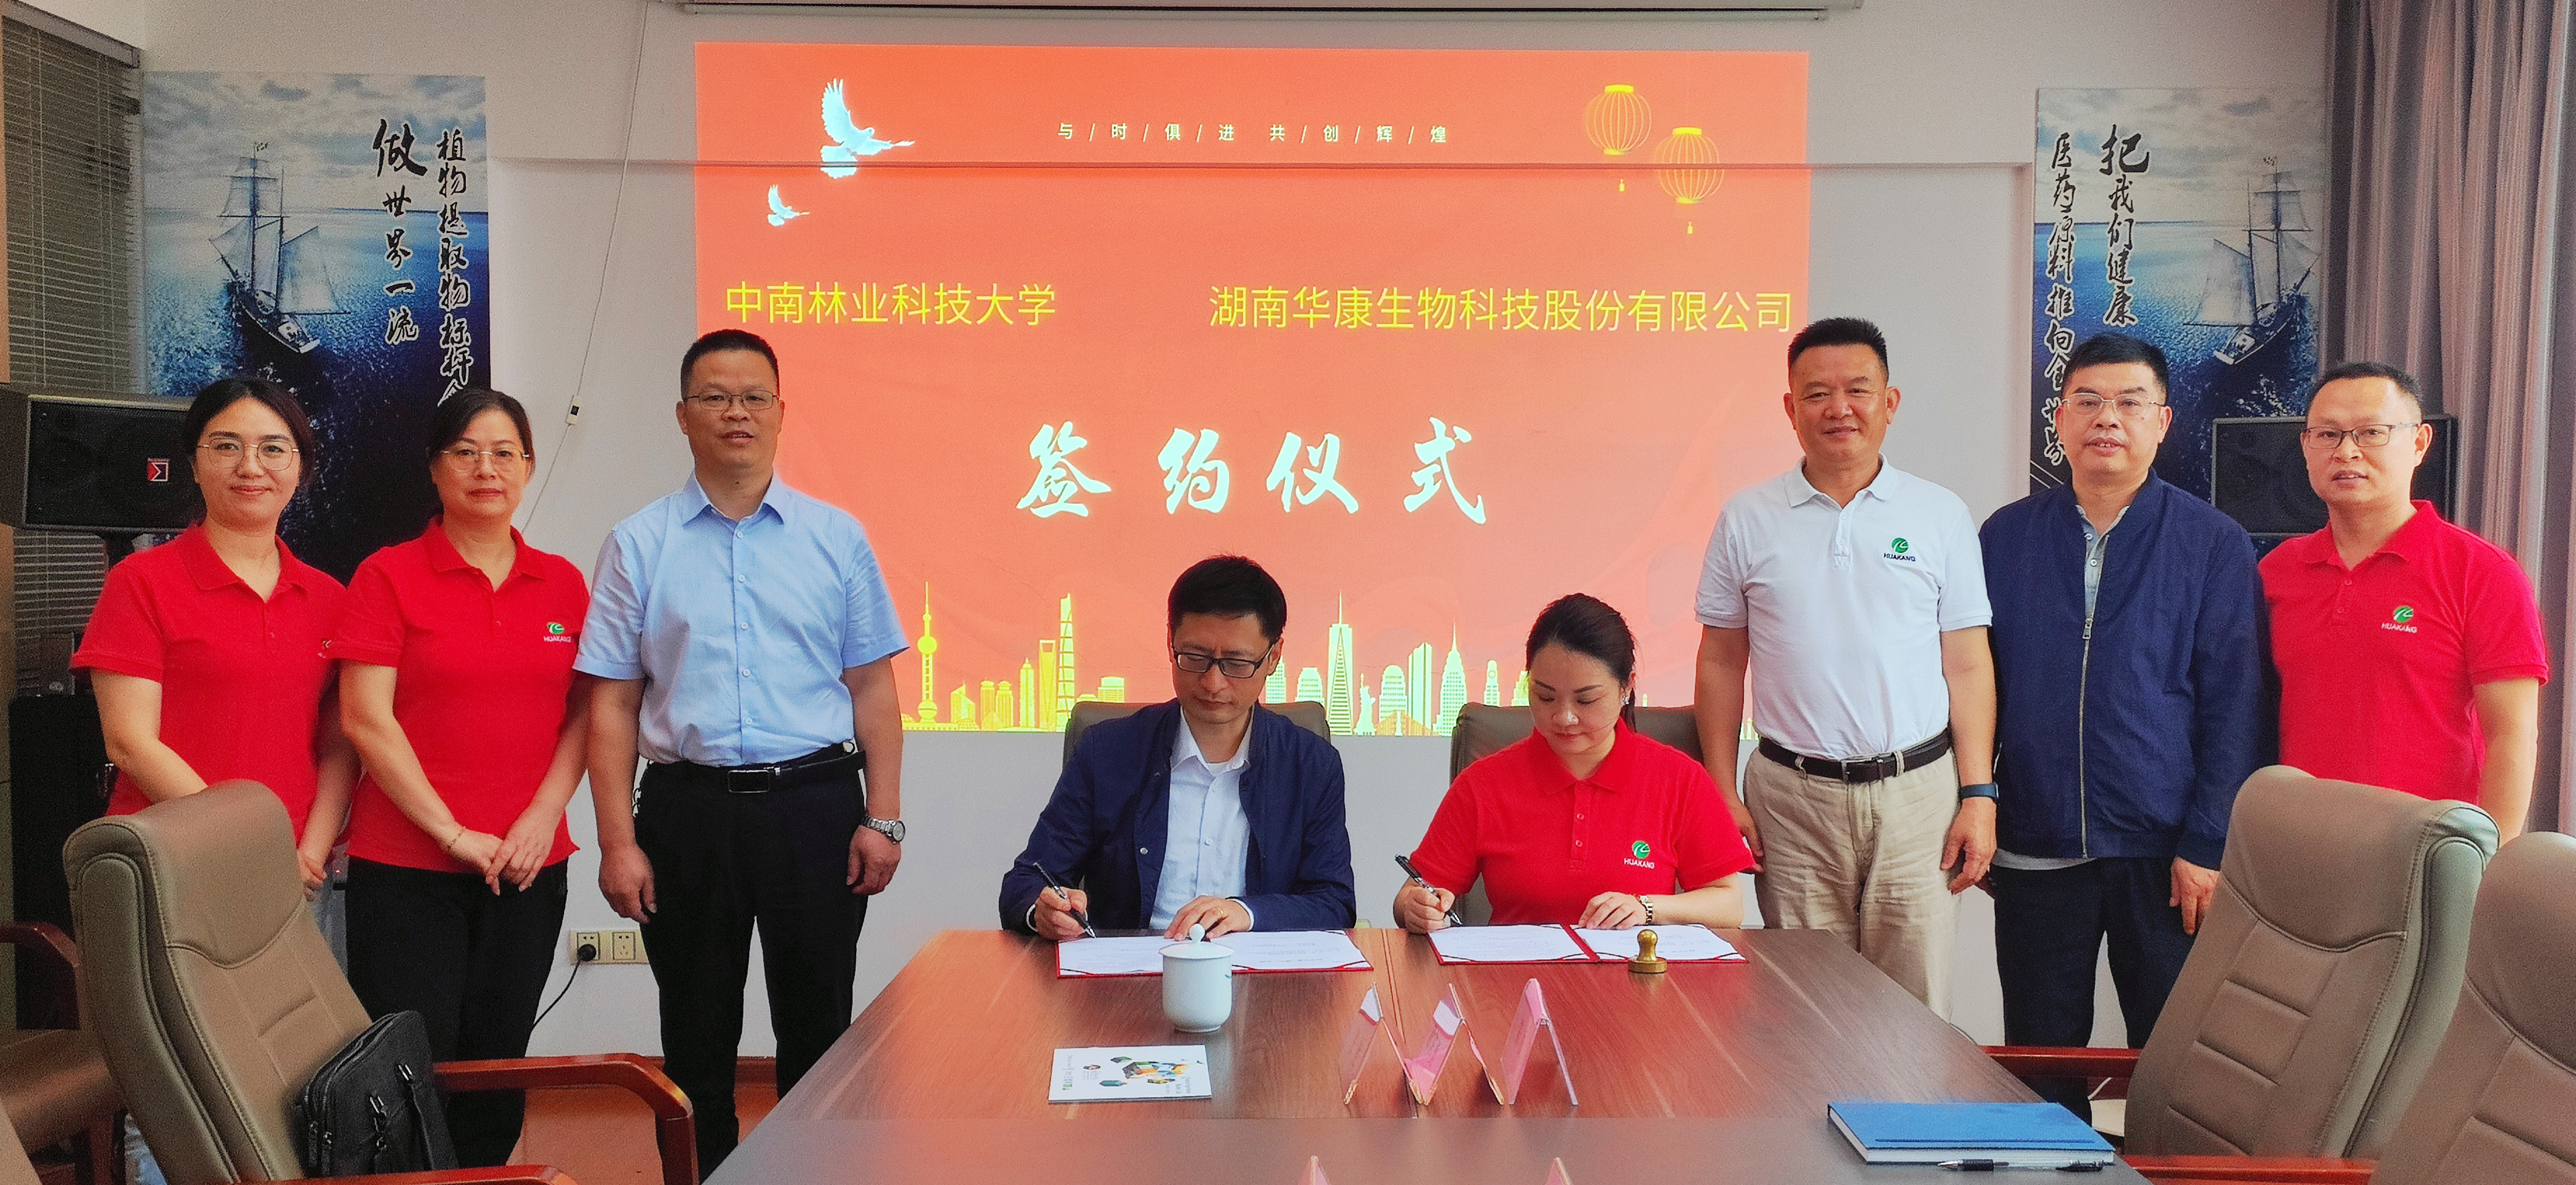 Hunan Huakang Biotech Inc. And Central South University of Forestry & Technology Signed An Industry-university-research Cooperation Agreement